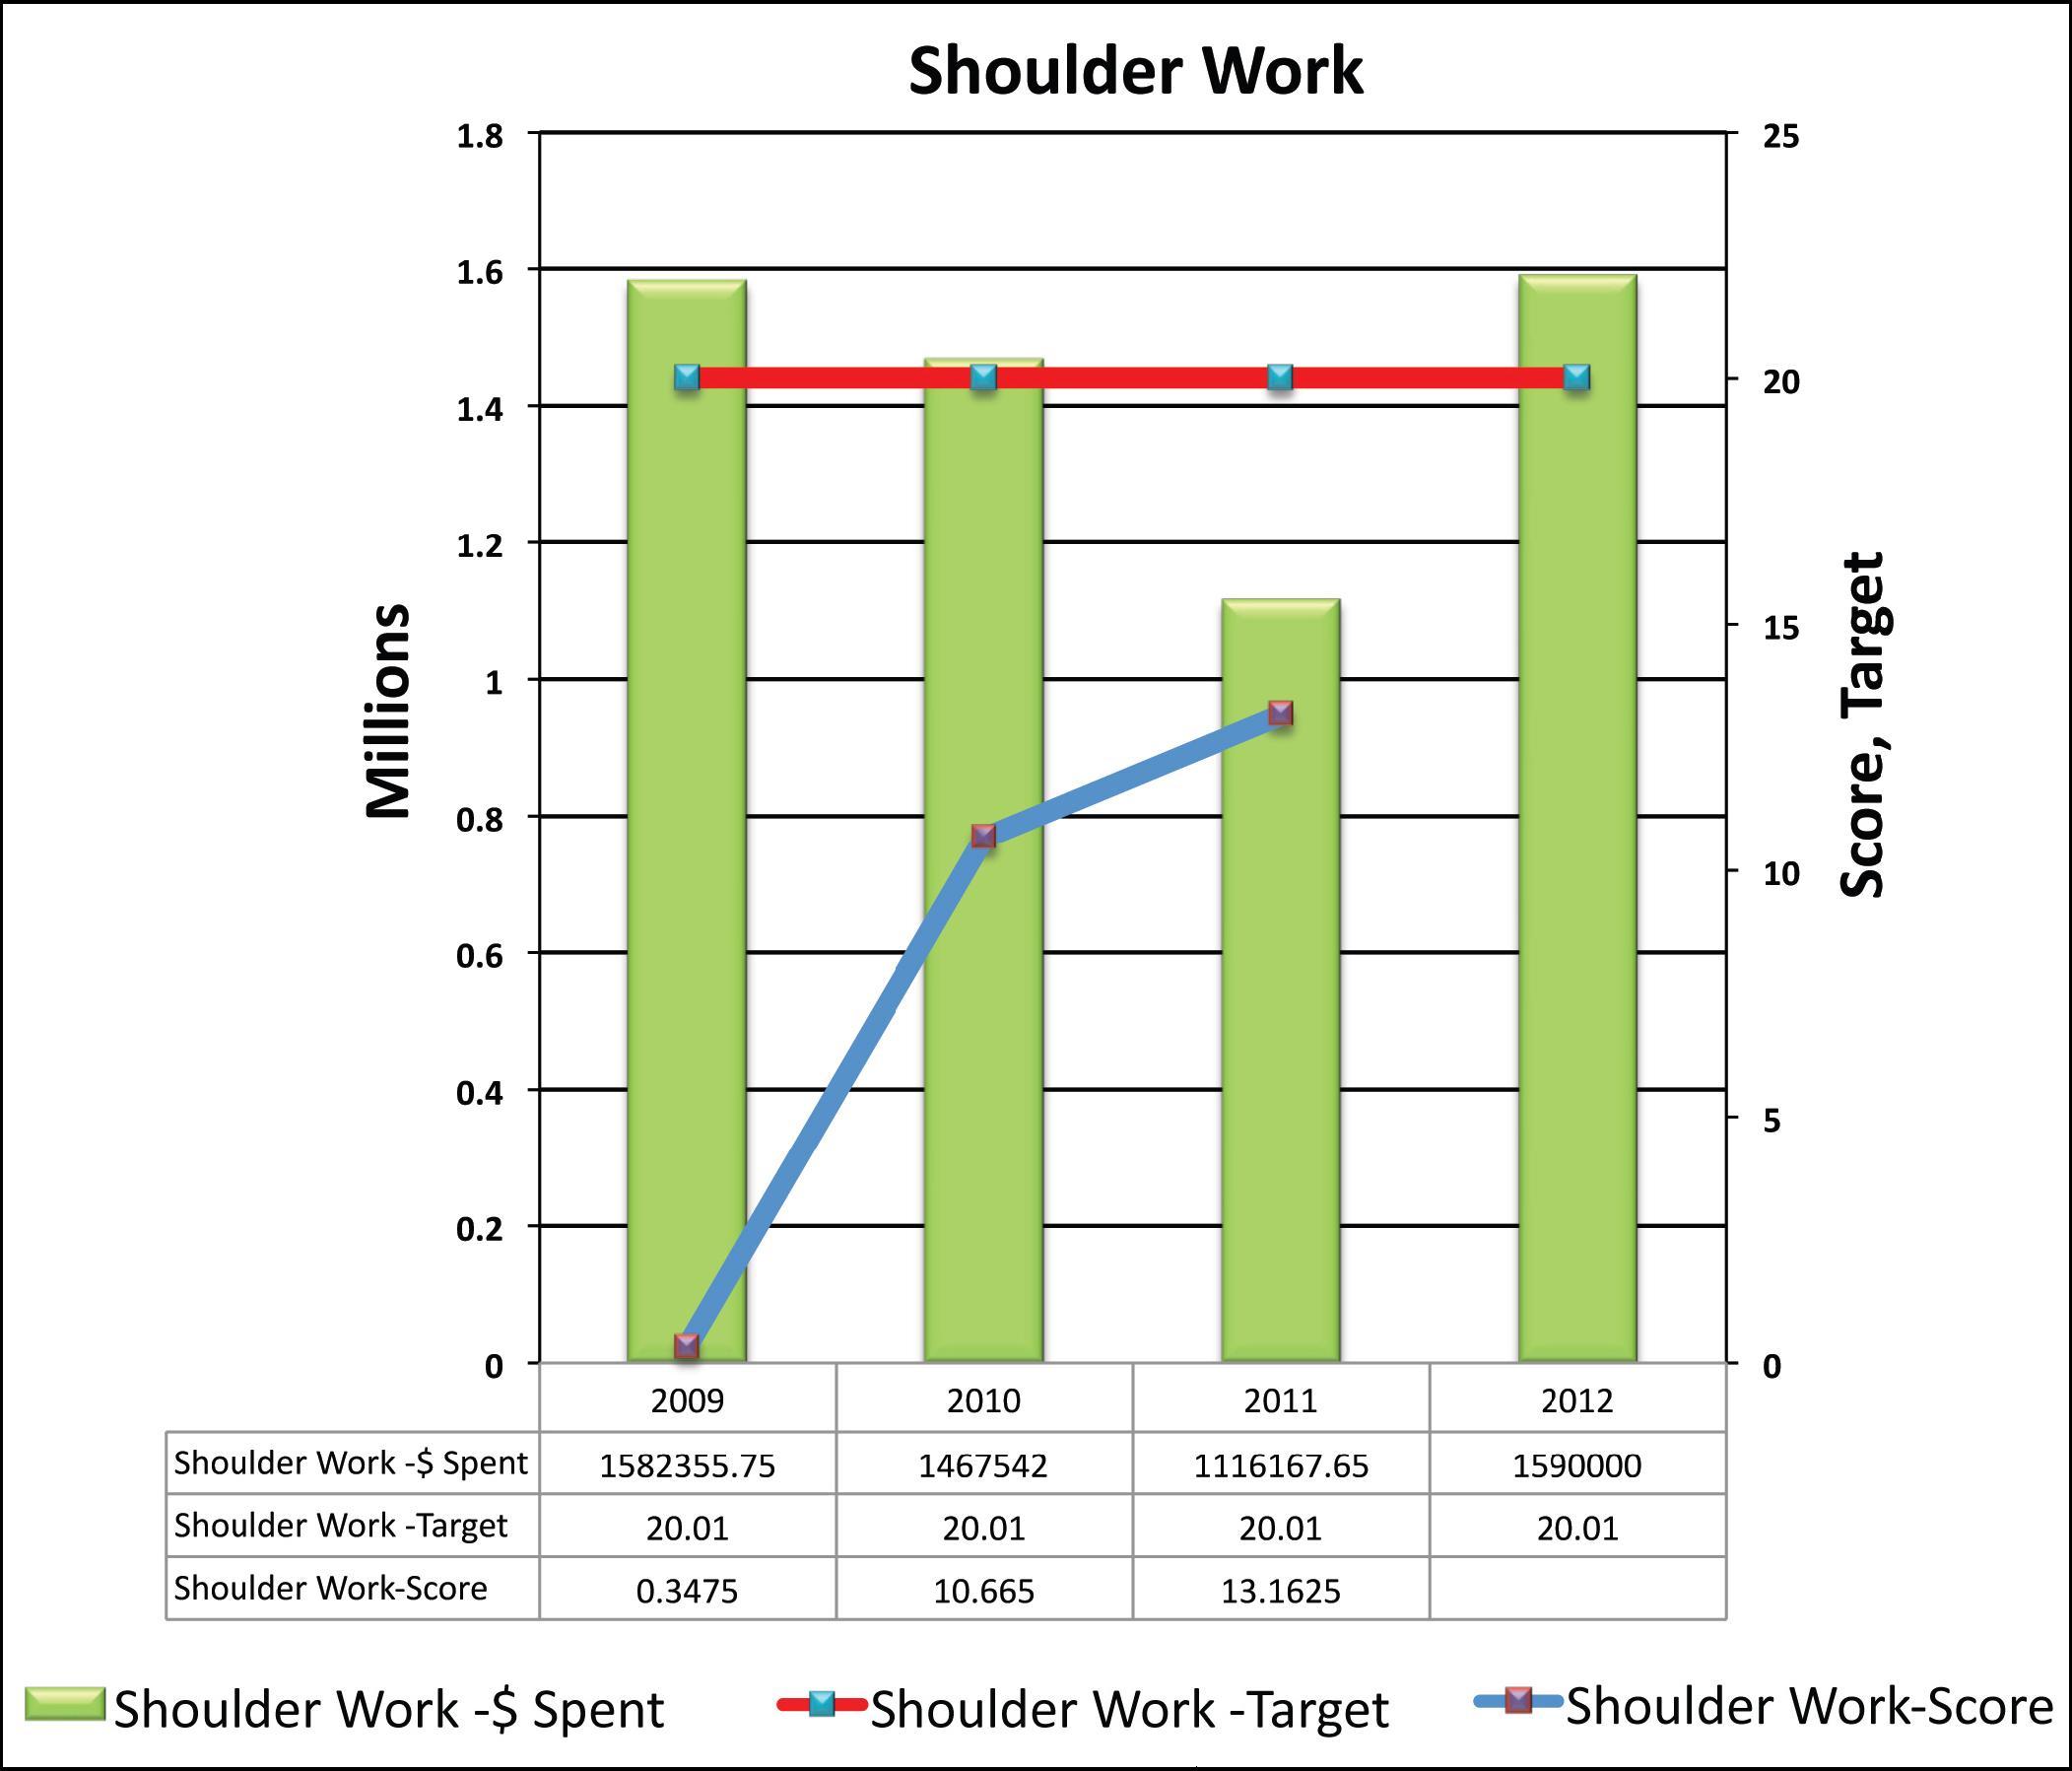 Figure 51 illustrates the amount spent on shoulder work in the years 2009 through 2012, as well as the target condition and the shoulder work score. The expenditures vary between one point five million and one point one million dollars. The target is a to have no more than 20 percent of the shoulders deficient. The actual scores indicate that conditions are much better than the target. The percent deficient was about three point four percent in 2009 rising to 13 percent in 2011. The budget was increased for 2012 to 1 point five million dollars, up from 1 point one million the year before.